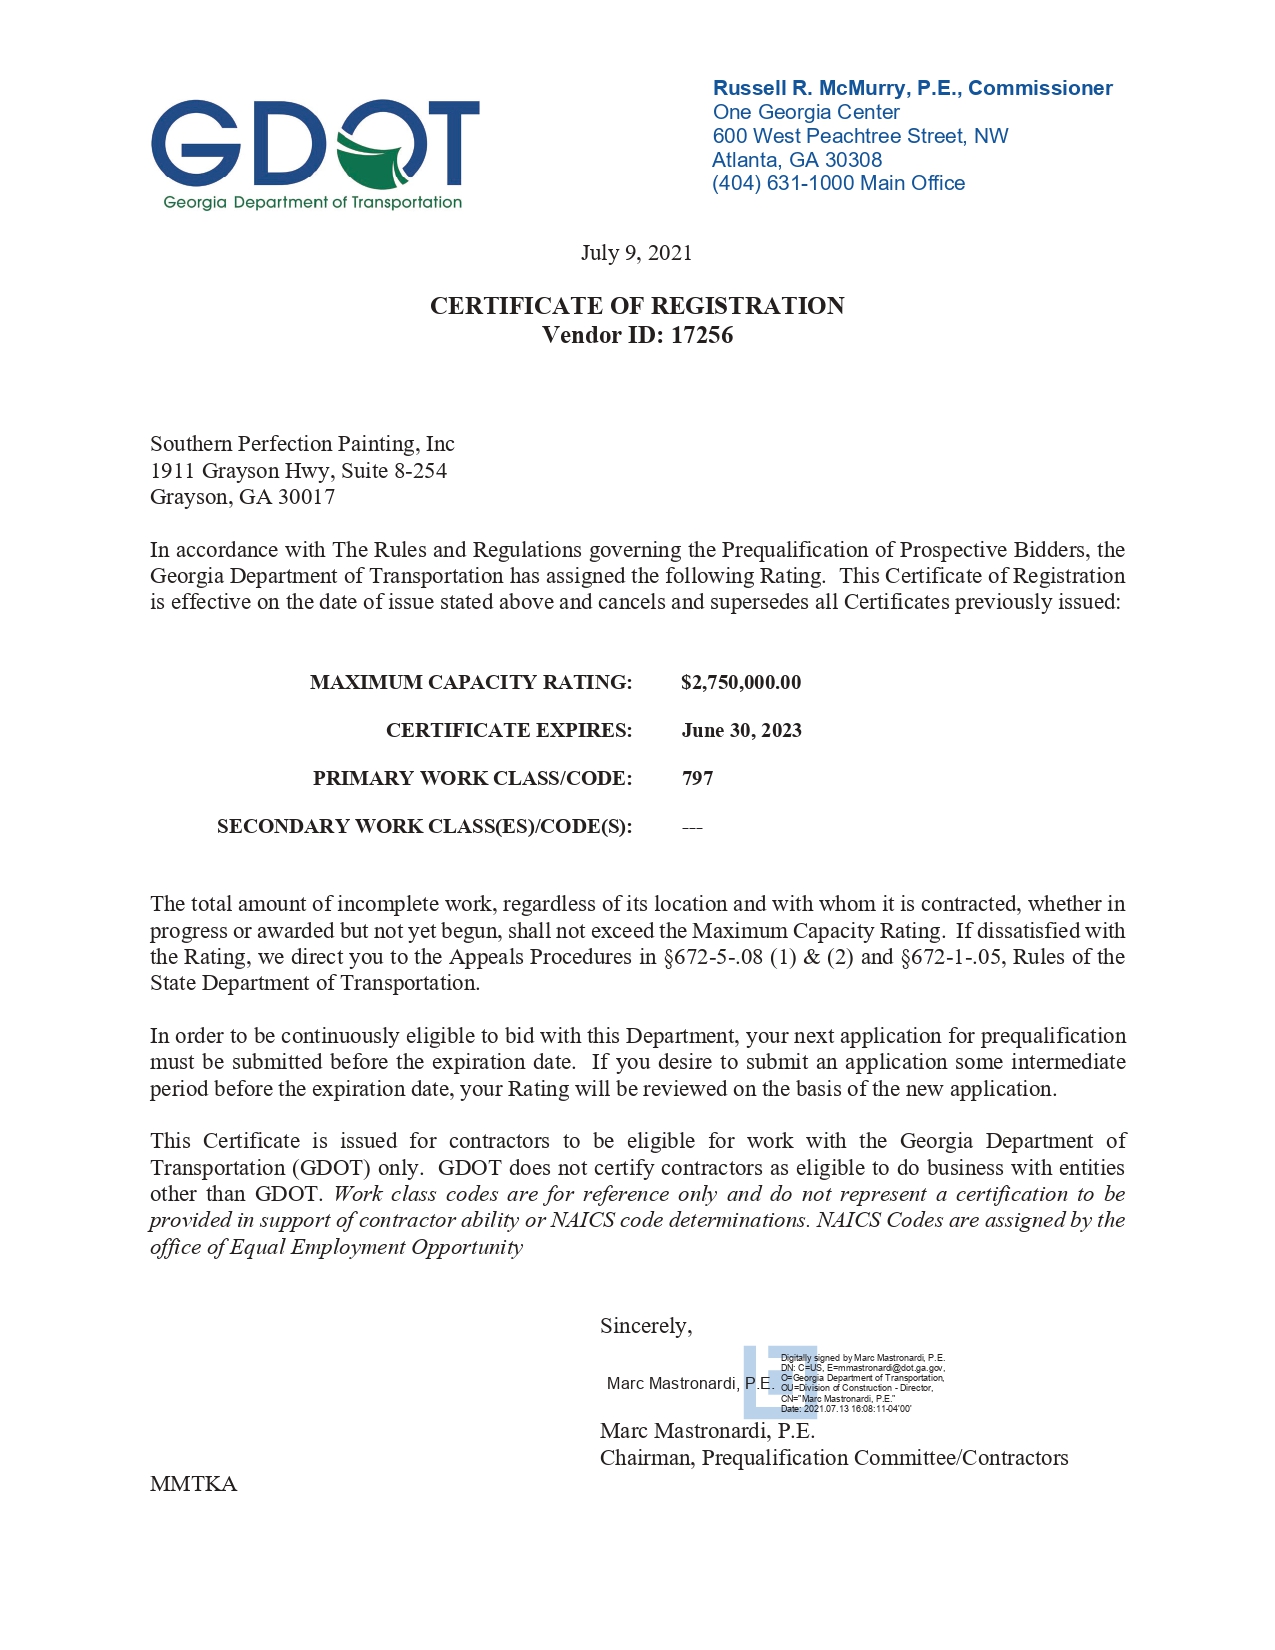 GDOT form 478 Government Certification